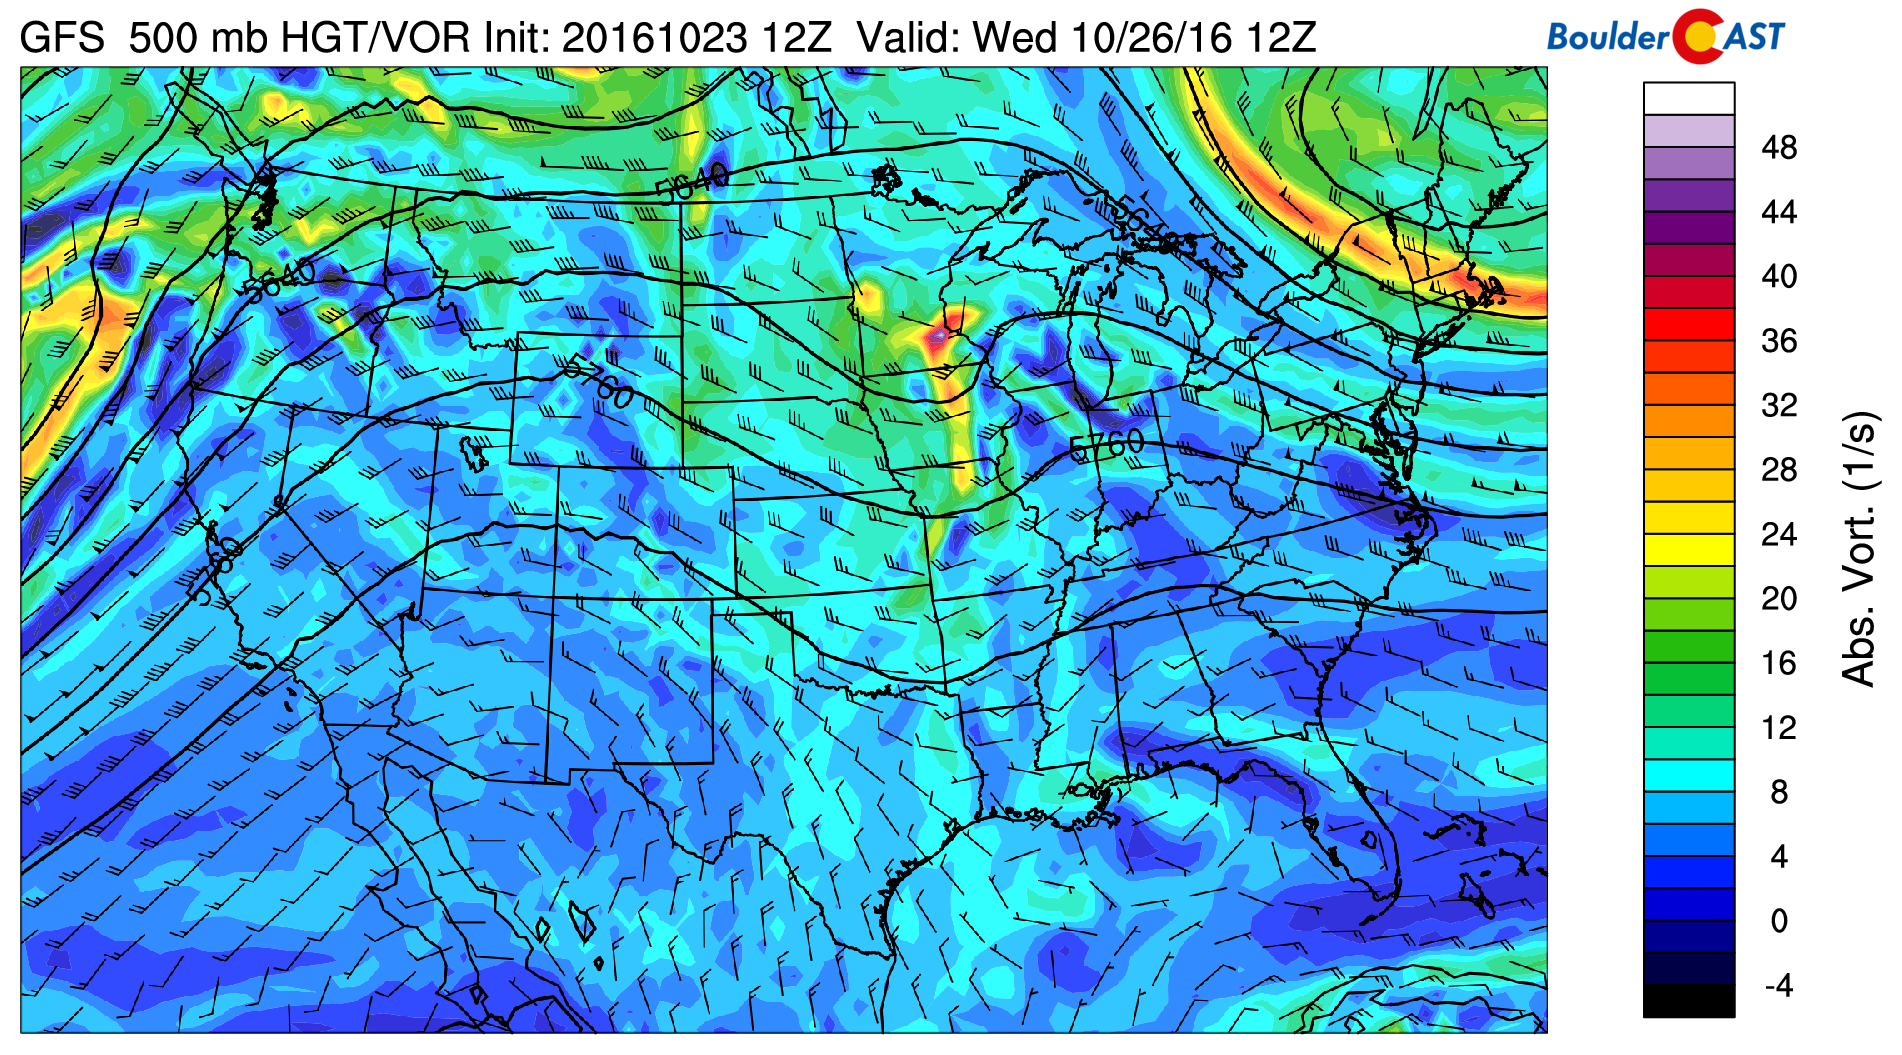 GFS 500 mb mid-level flow for Wednesday